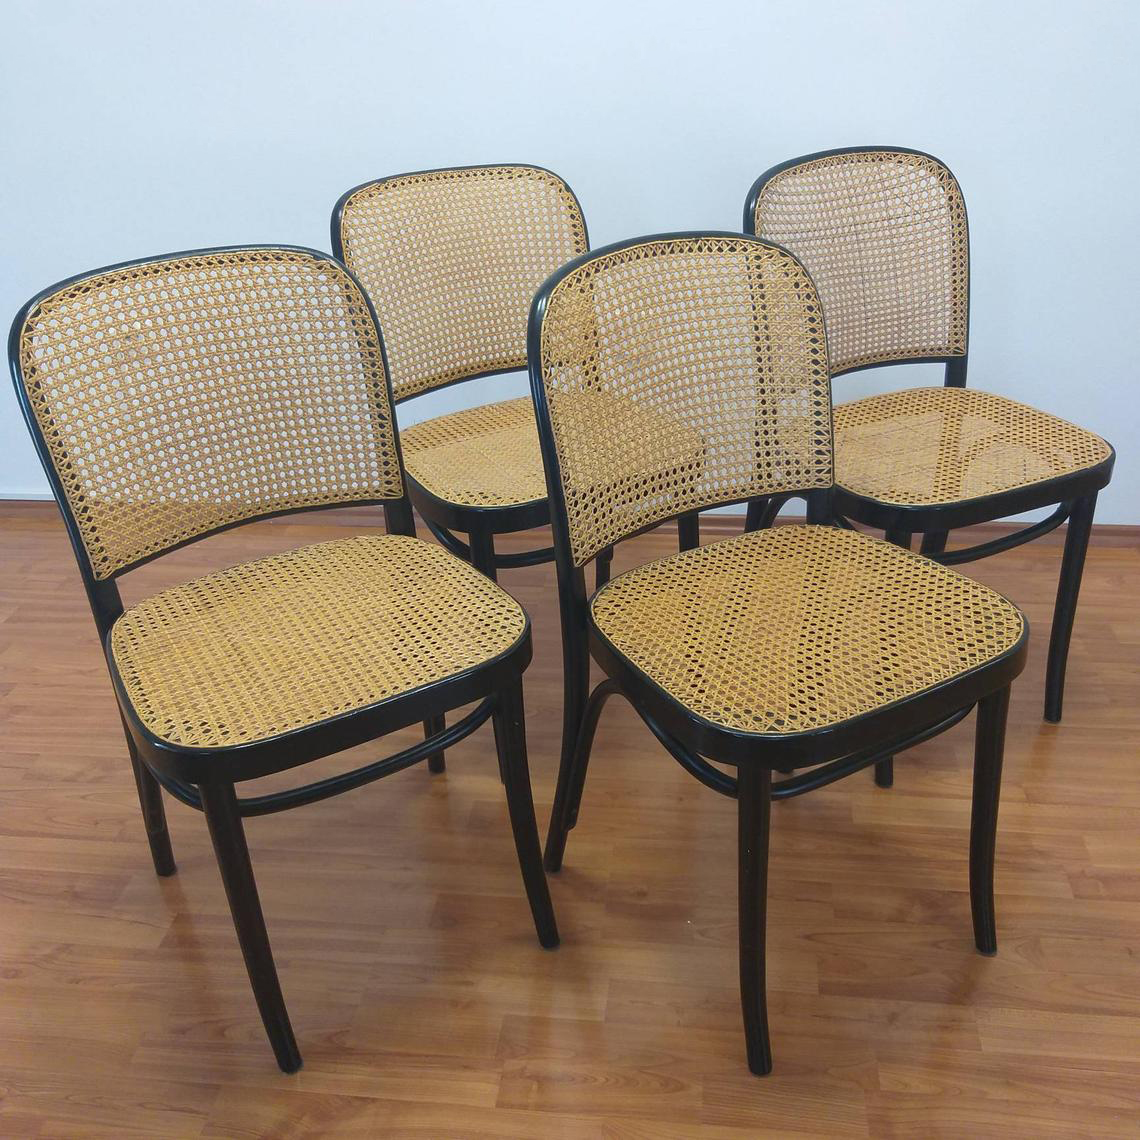 Set of 4 Cane Bentwood Chairs, Josef Hofmann Prague Chairs, N.811 Chair, Italy 80s